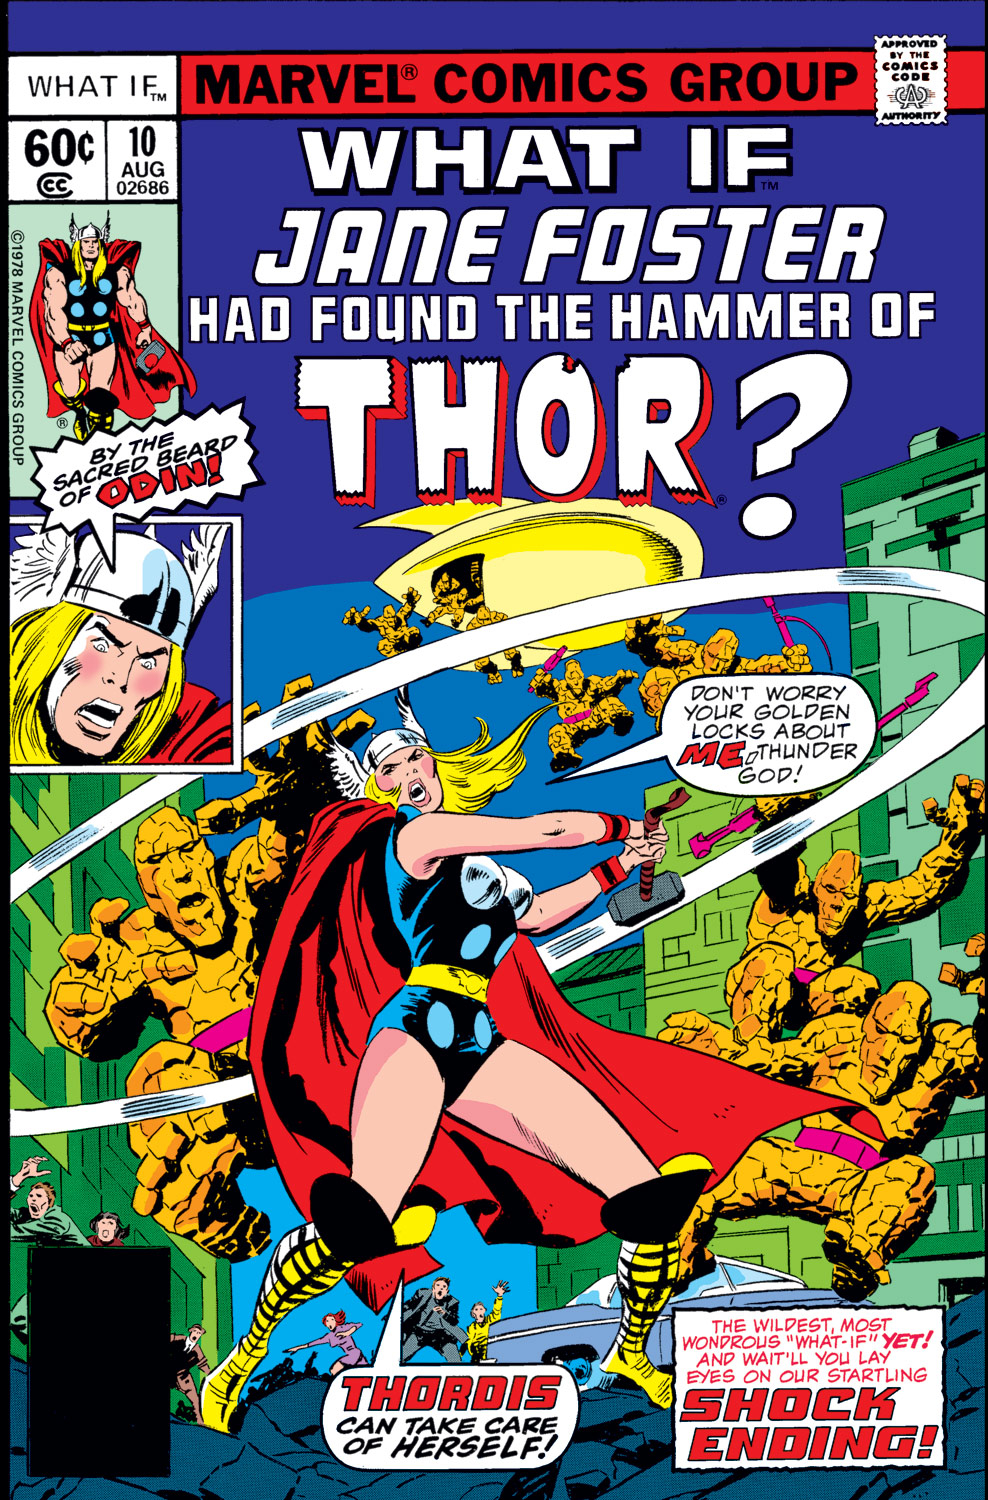 What If? (1977) issue 10 - Jane Foster had found the hammer of Thor - Page 1